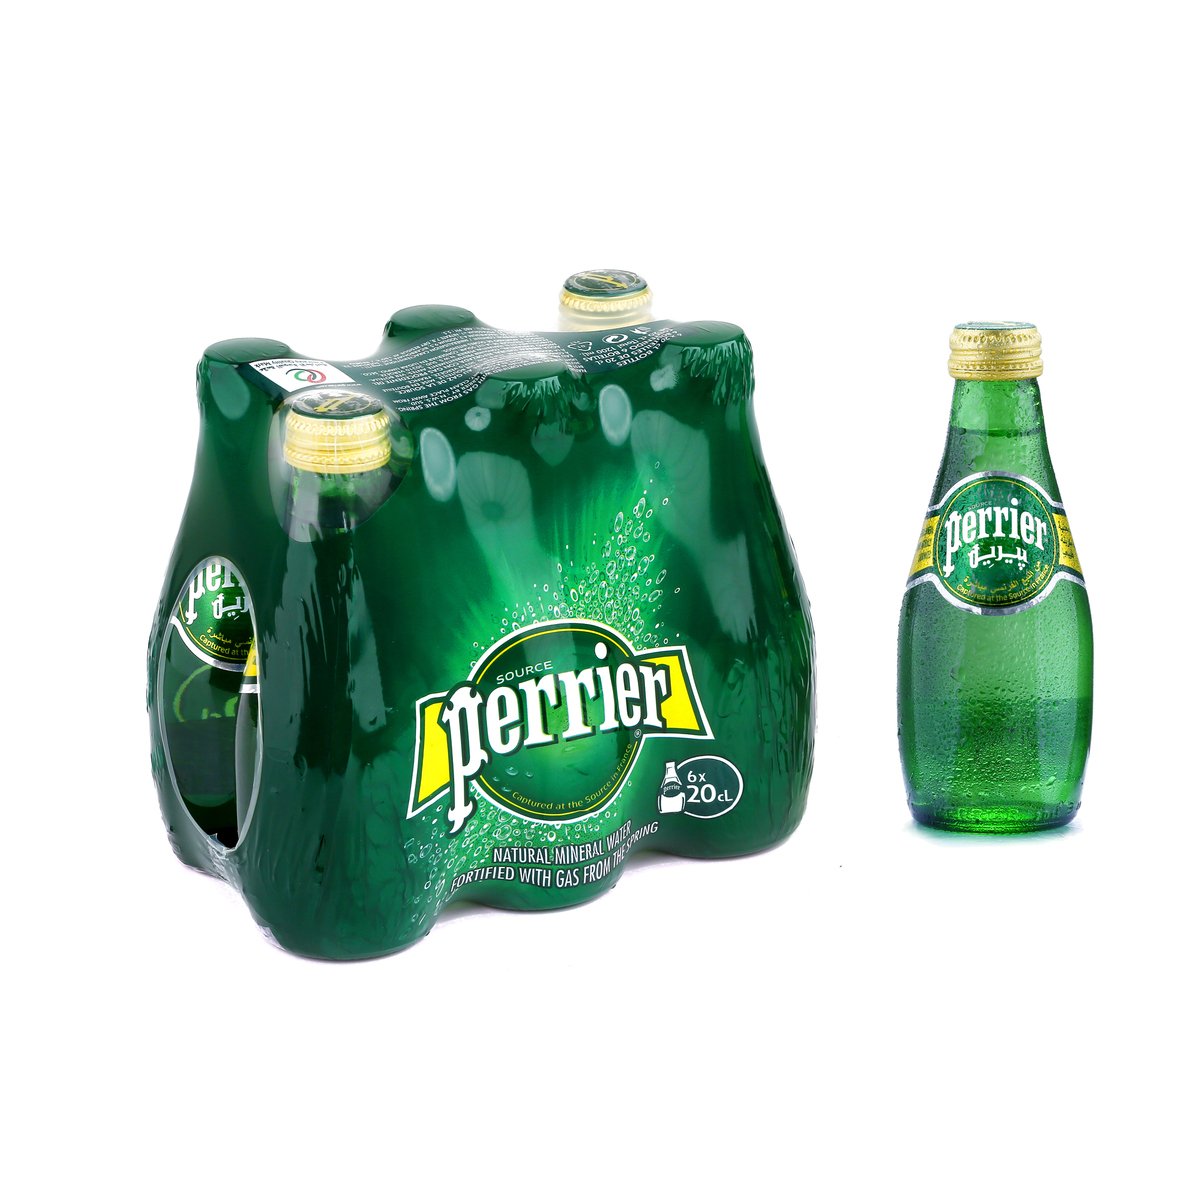 Perrier Natural Sparkling Mineral Water Regular 6 x 200 ml